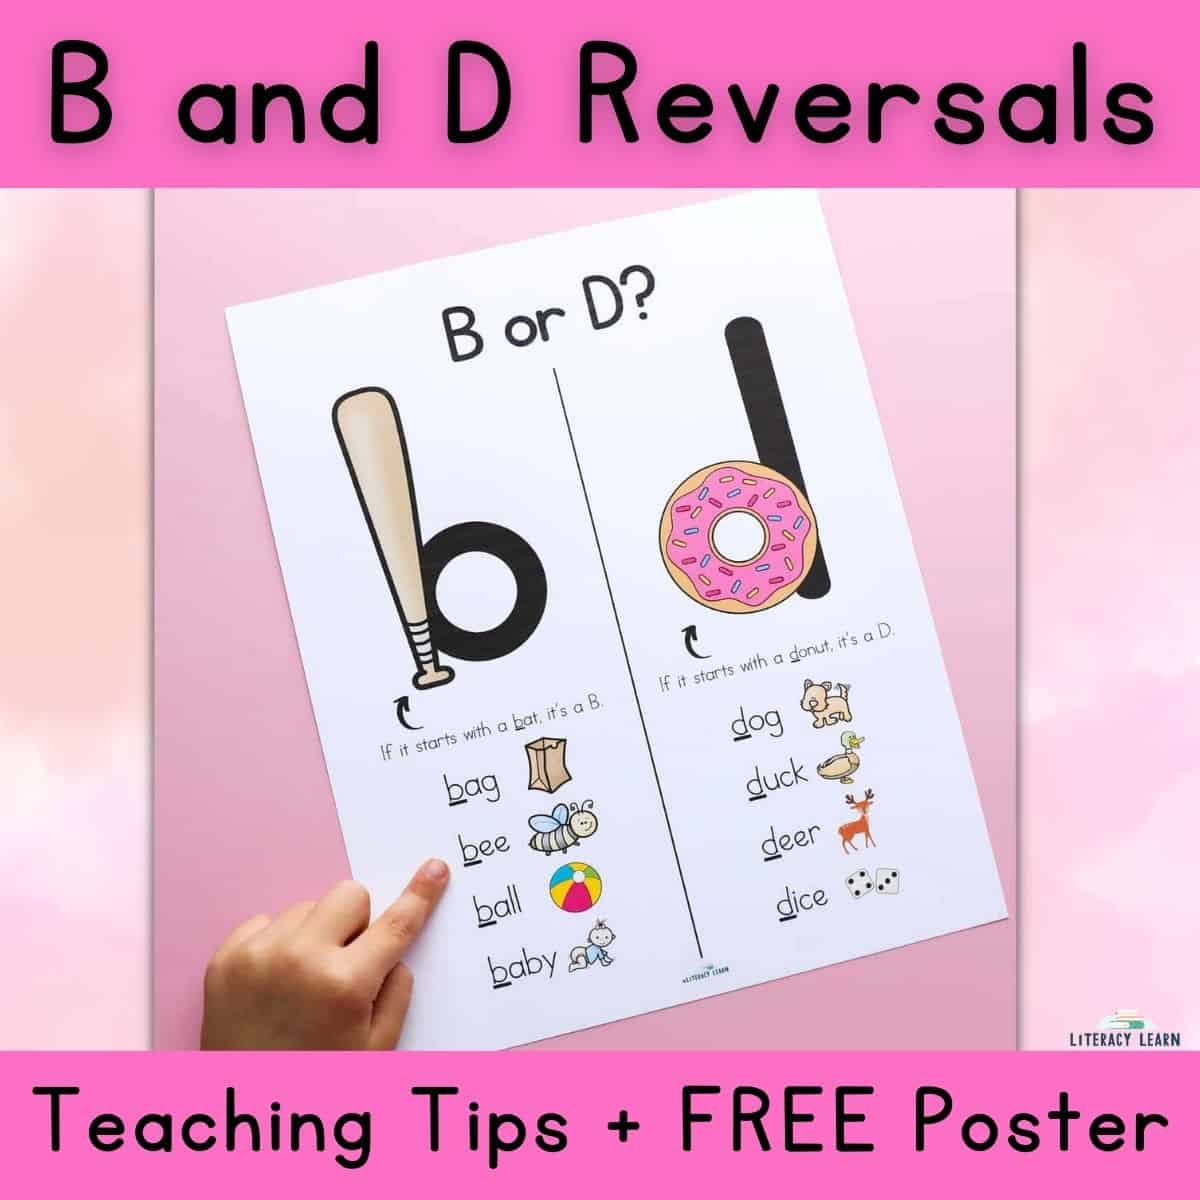 Pink graphic with title "B and D Reversals Teaching Tips + Free Poster " with photo of b/d poster.